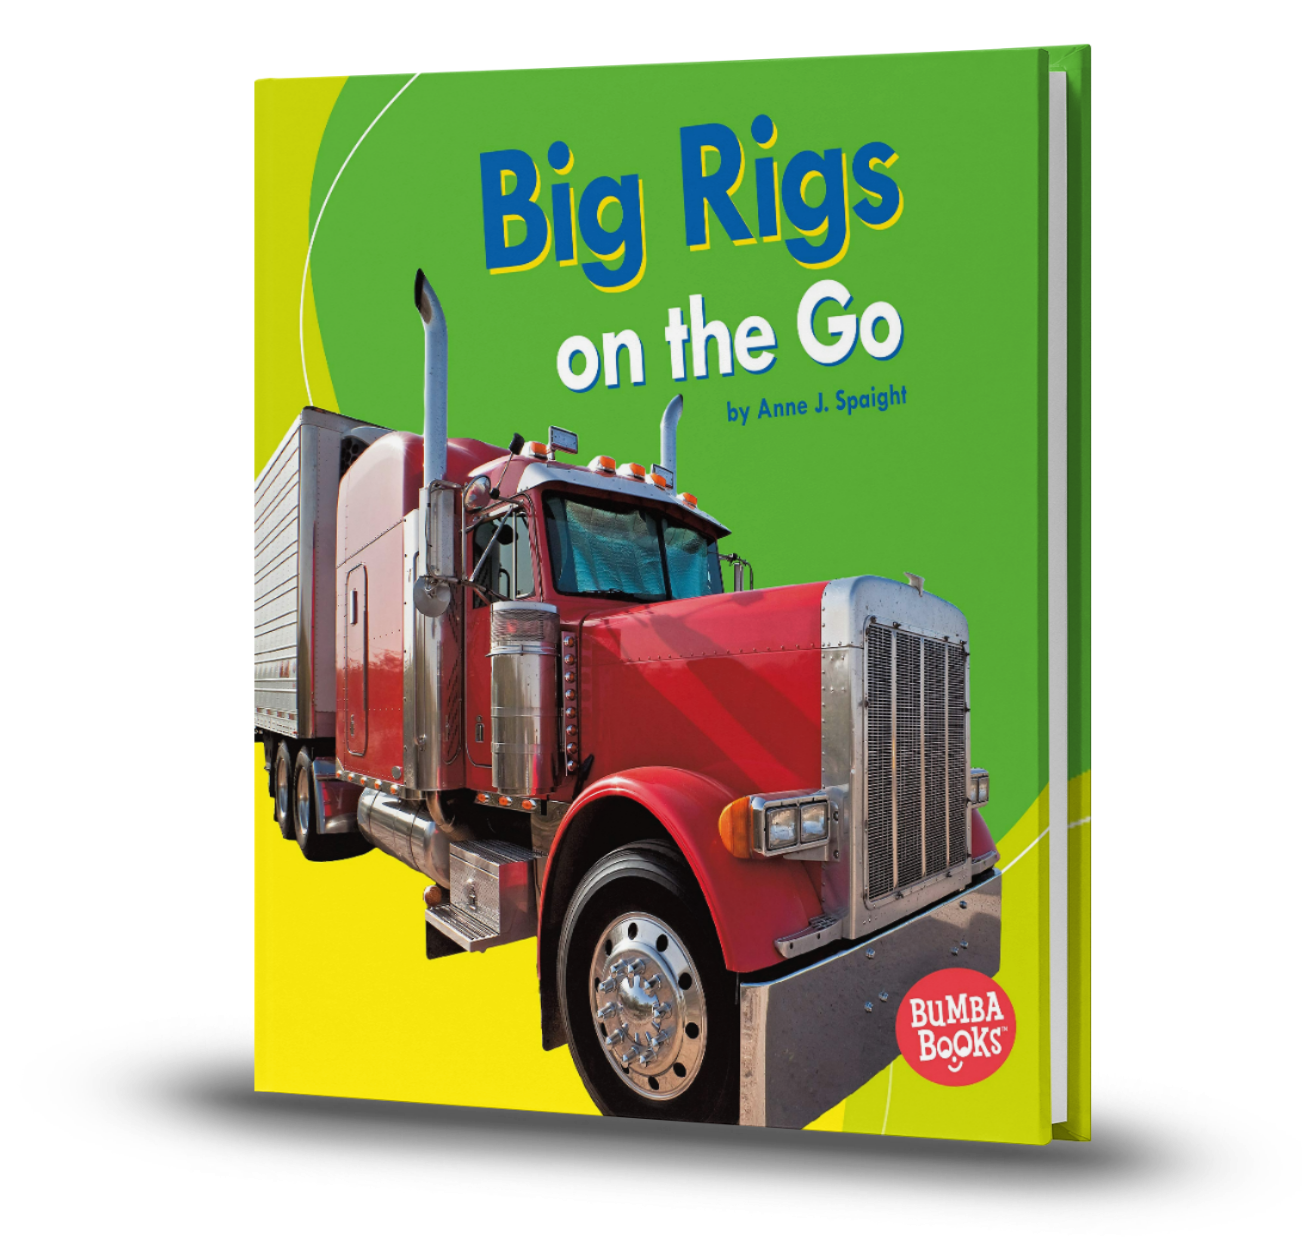 Big Rigs on the Go - Anne J. Spaight